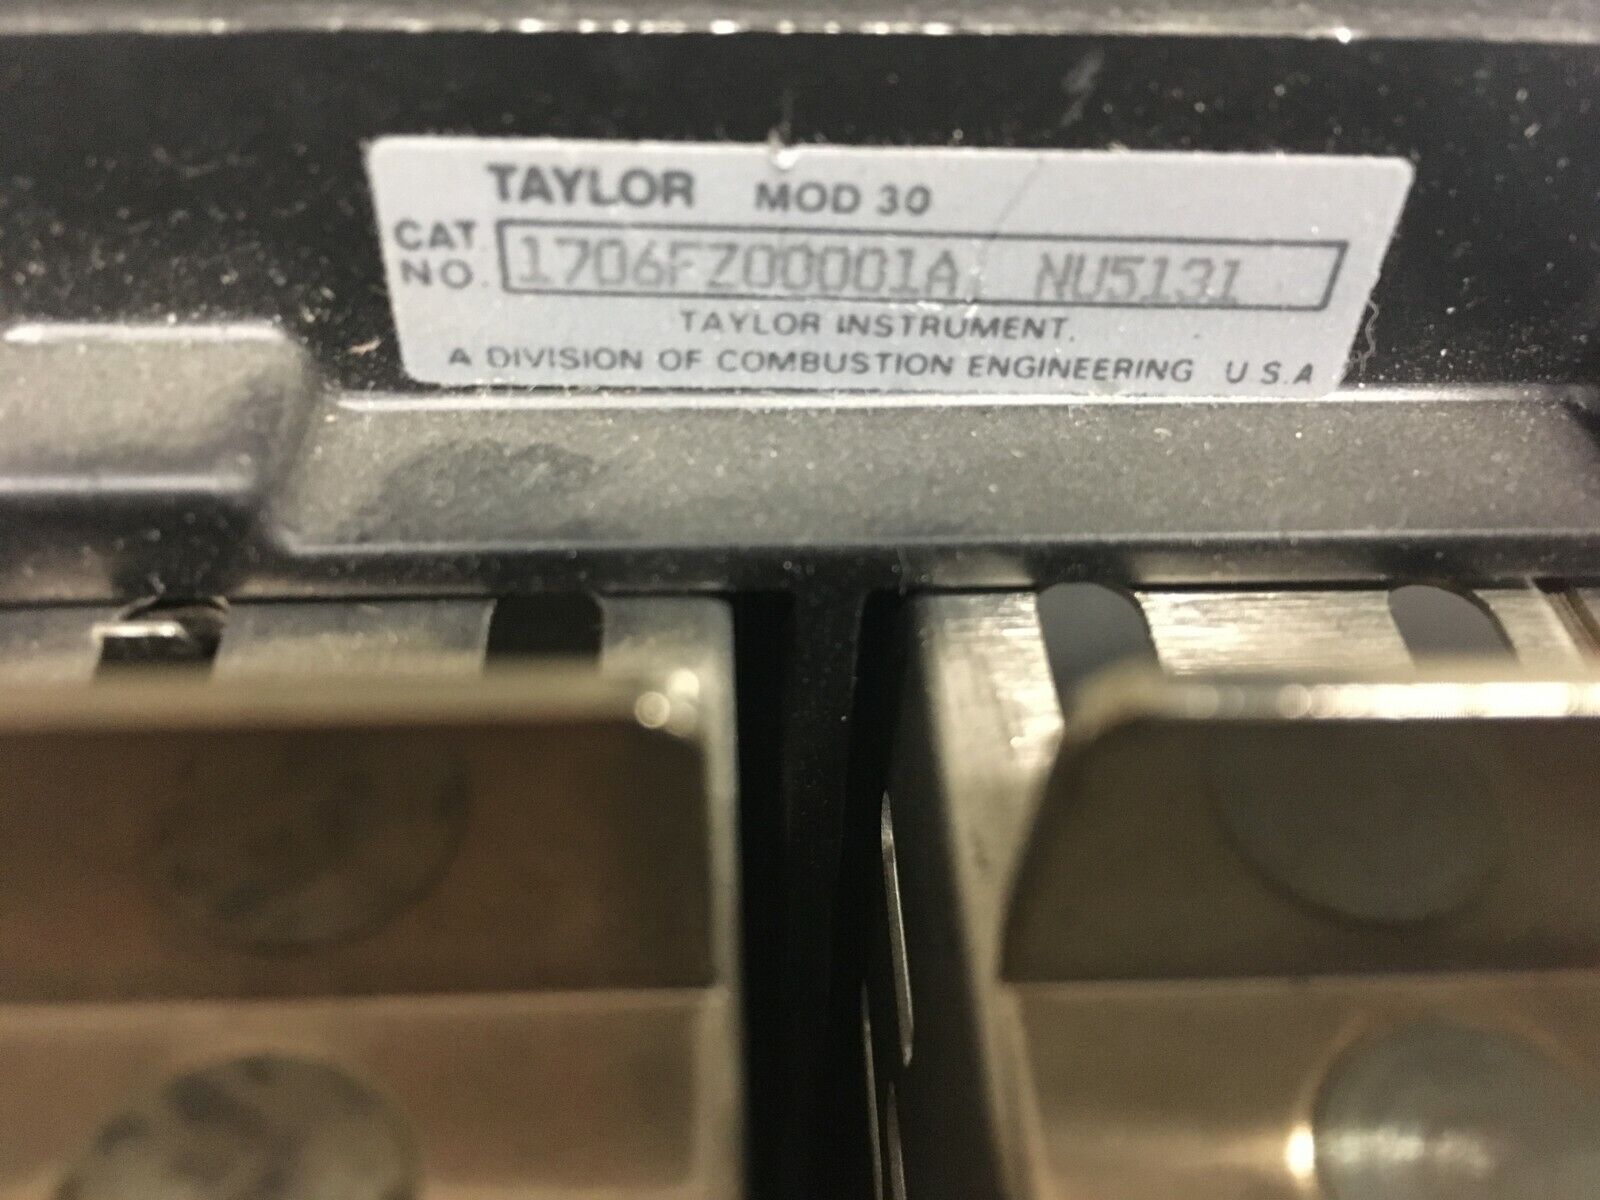 Taylor MOD Systems MOD 30 1702FZ00001A Unit Cabinet With 3 Covers